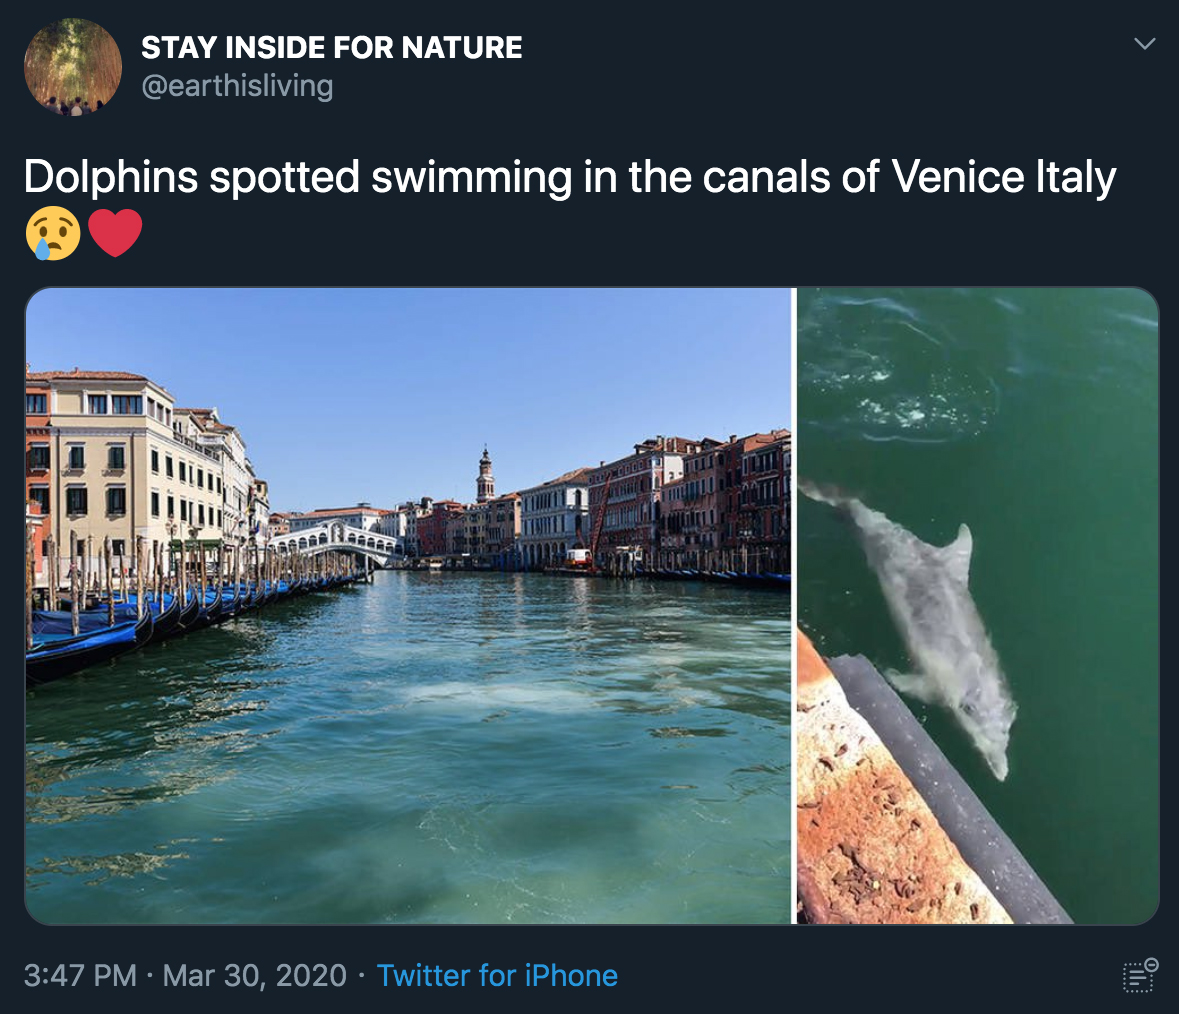 Dolphins spotted swimming in the canals of Venice Italy